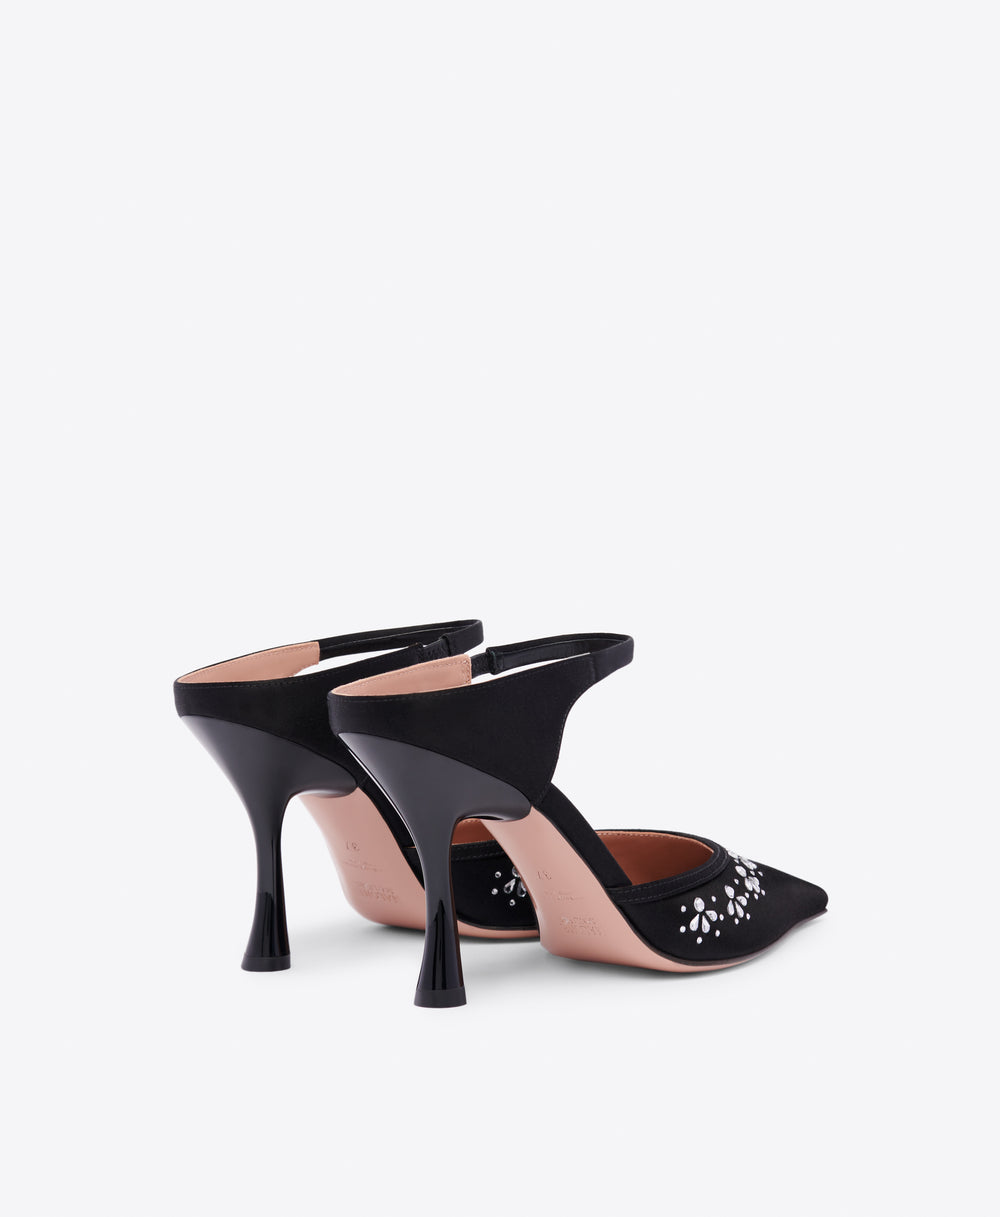 Cassie 90 Black Satin Heeled Mules Malone Souliers